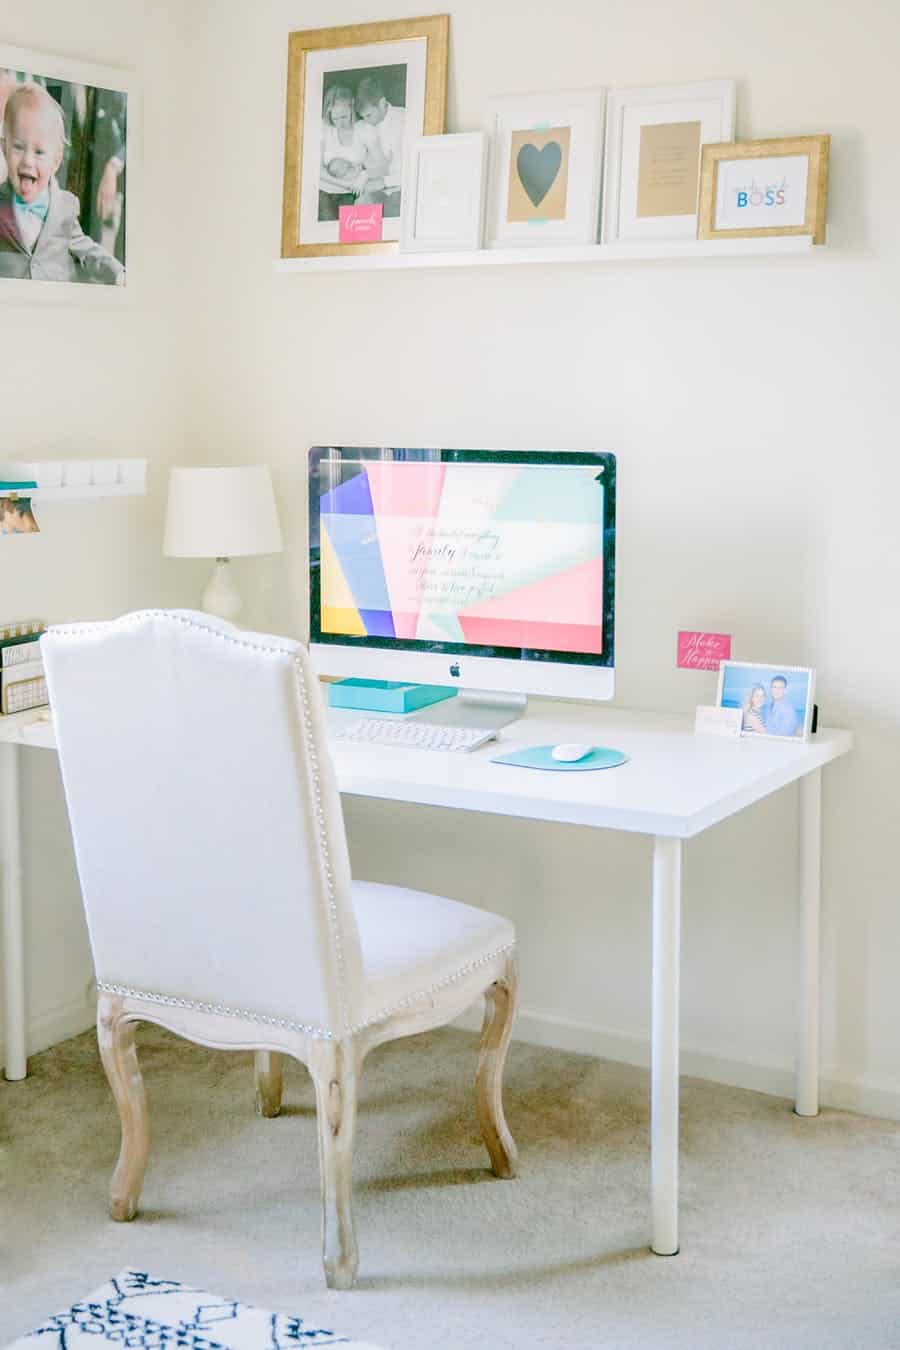 Small Home Office Ideas That Will Make You Want to Work Overtime #cozyofficenook #smallhomeofficeinspiration #officedesk #prettyhomeoffice